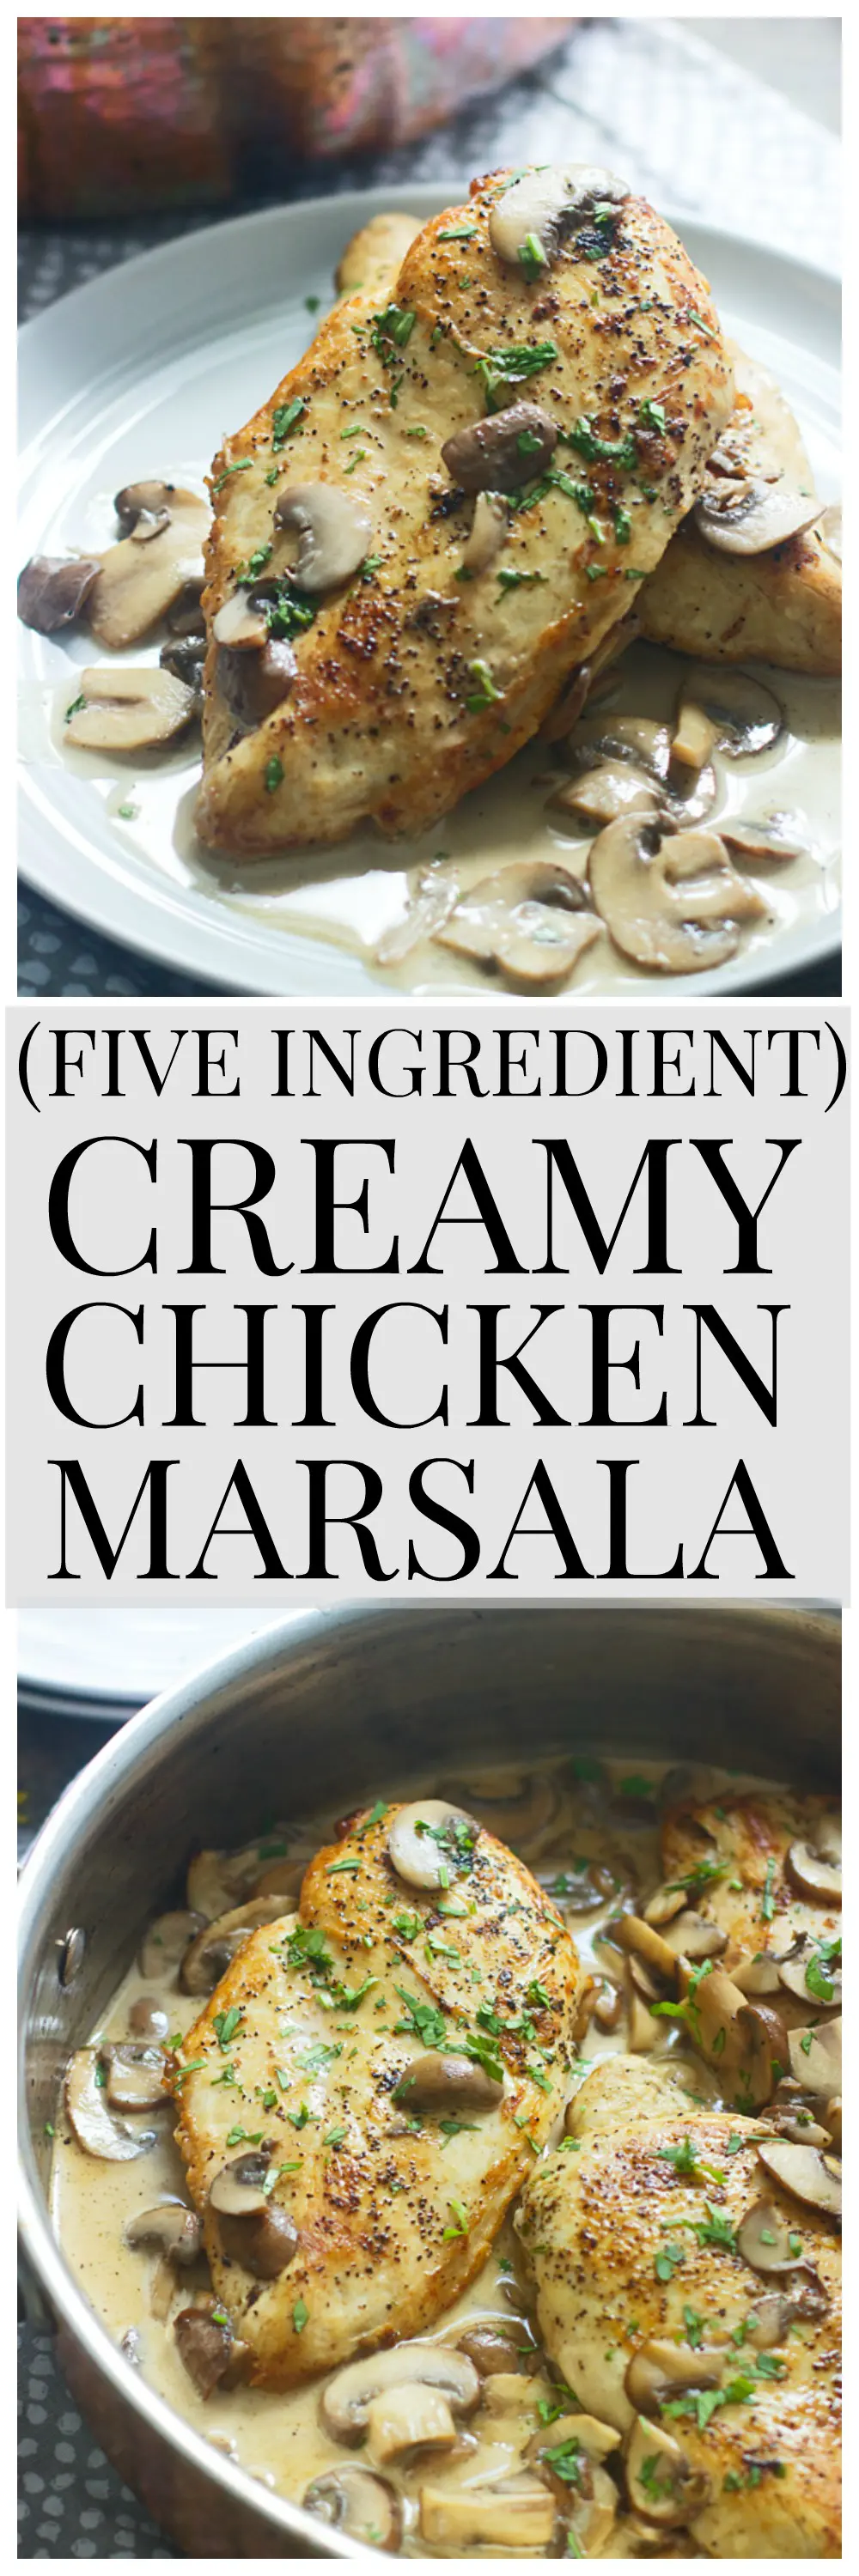 Five Ingredient Creamy Chicken Marsala- SO quick and easy!